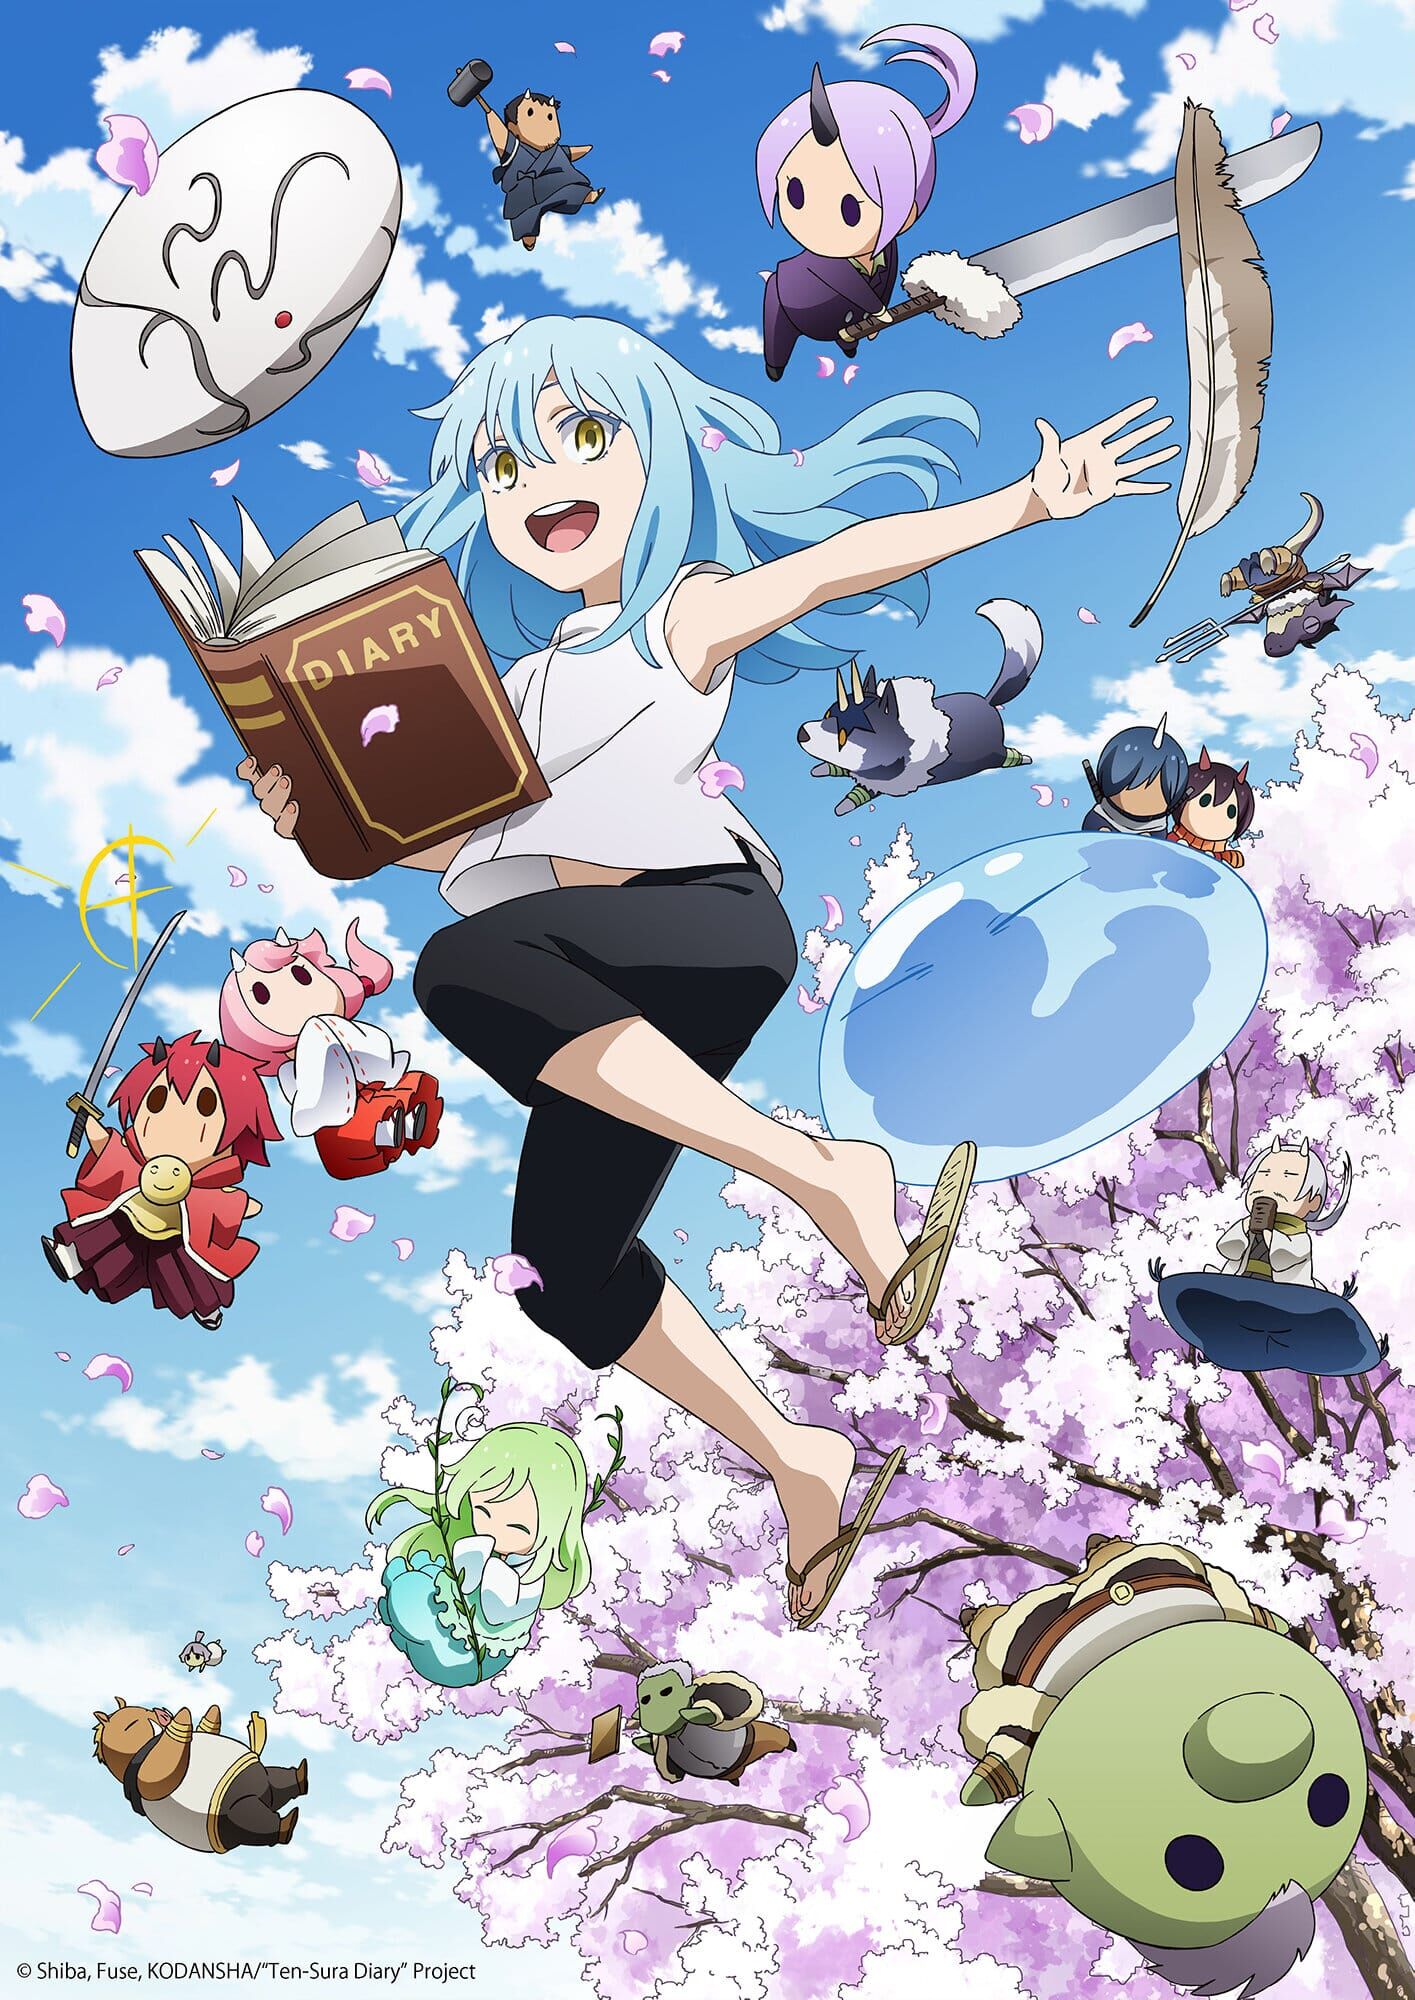 That Time I Got Reincarnated as a Slime Season 3: Release date rumors,  cast, more - Dexerto